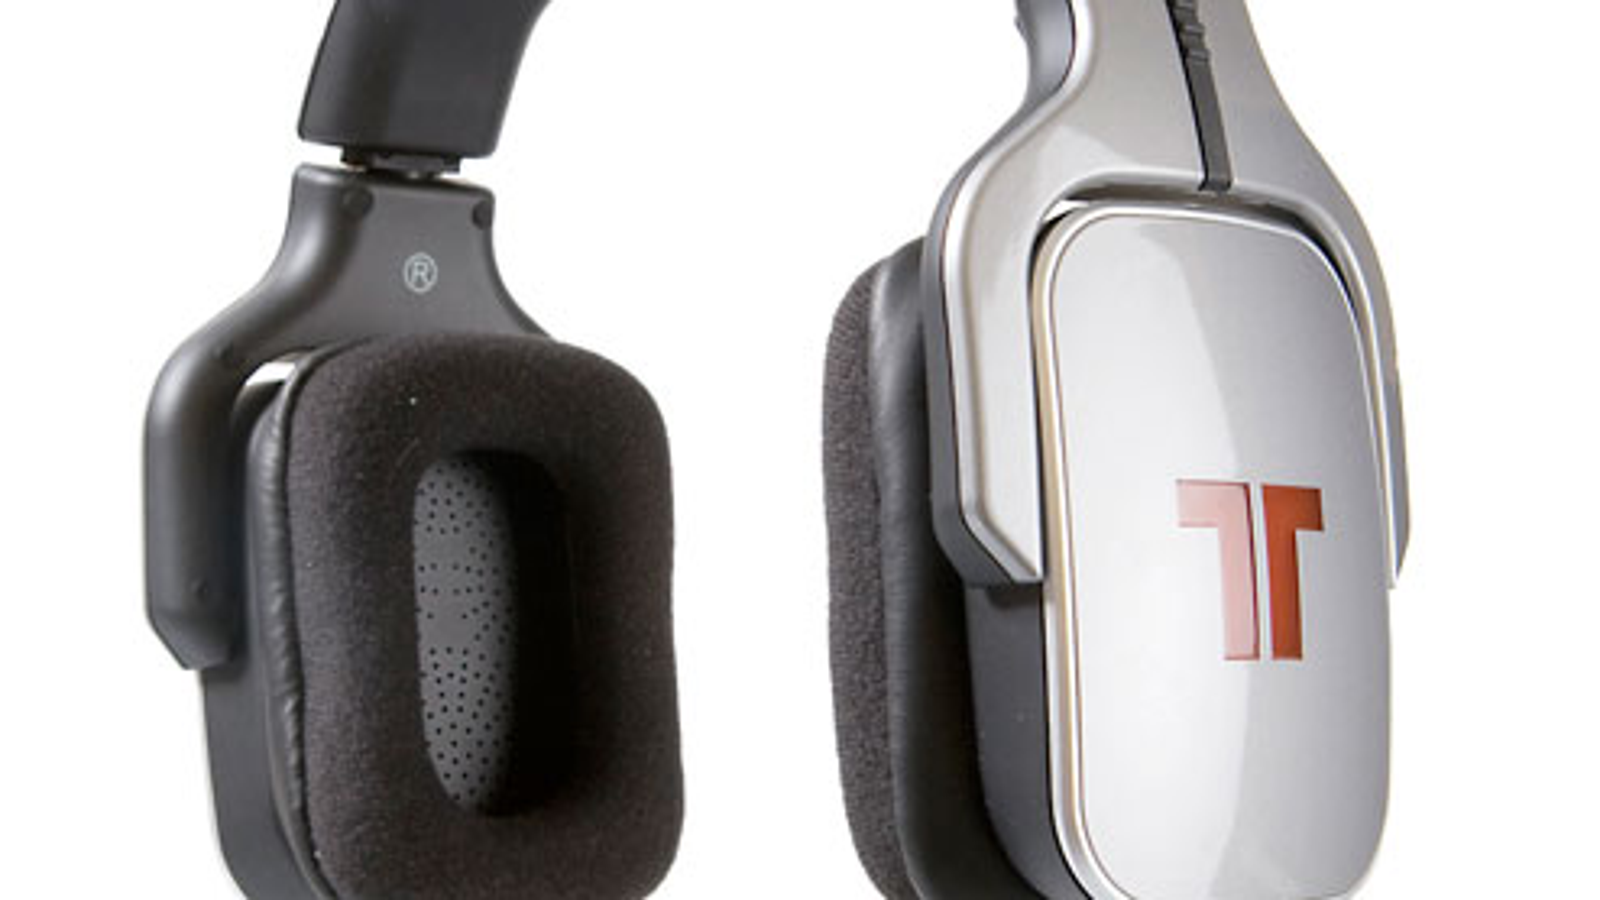 tritton ax pro dolby 5.1 review